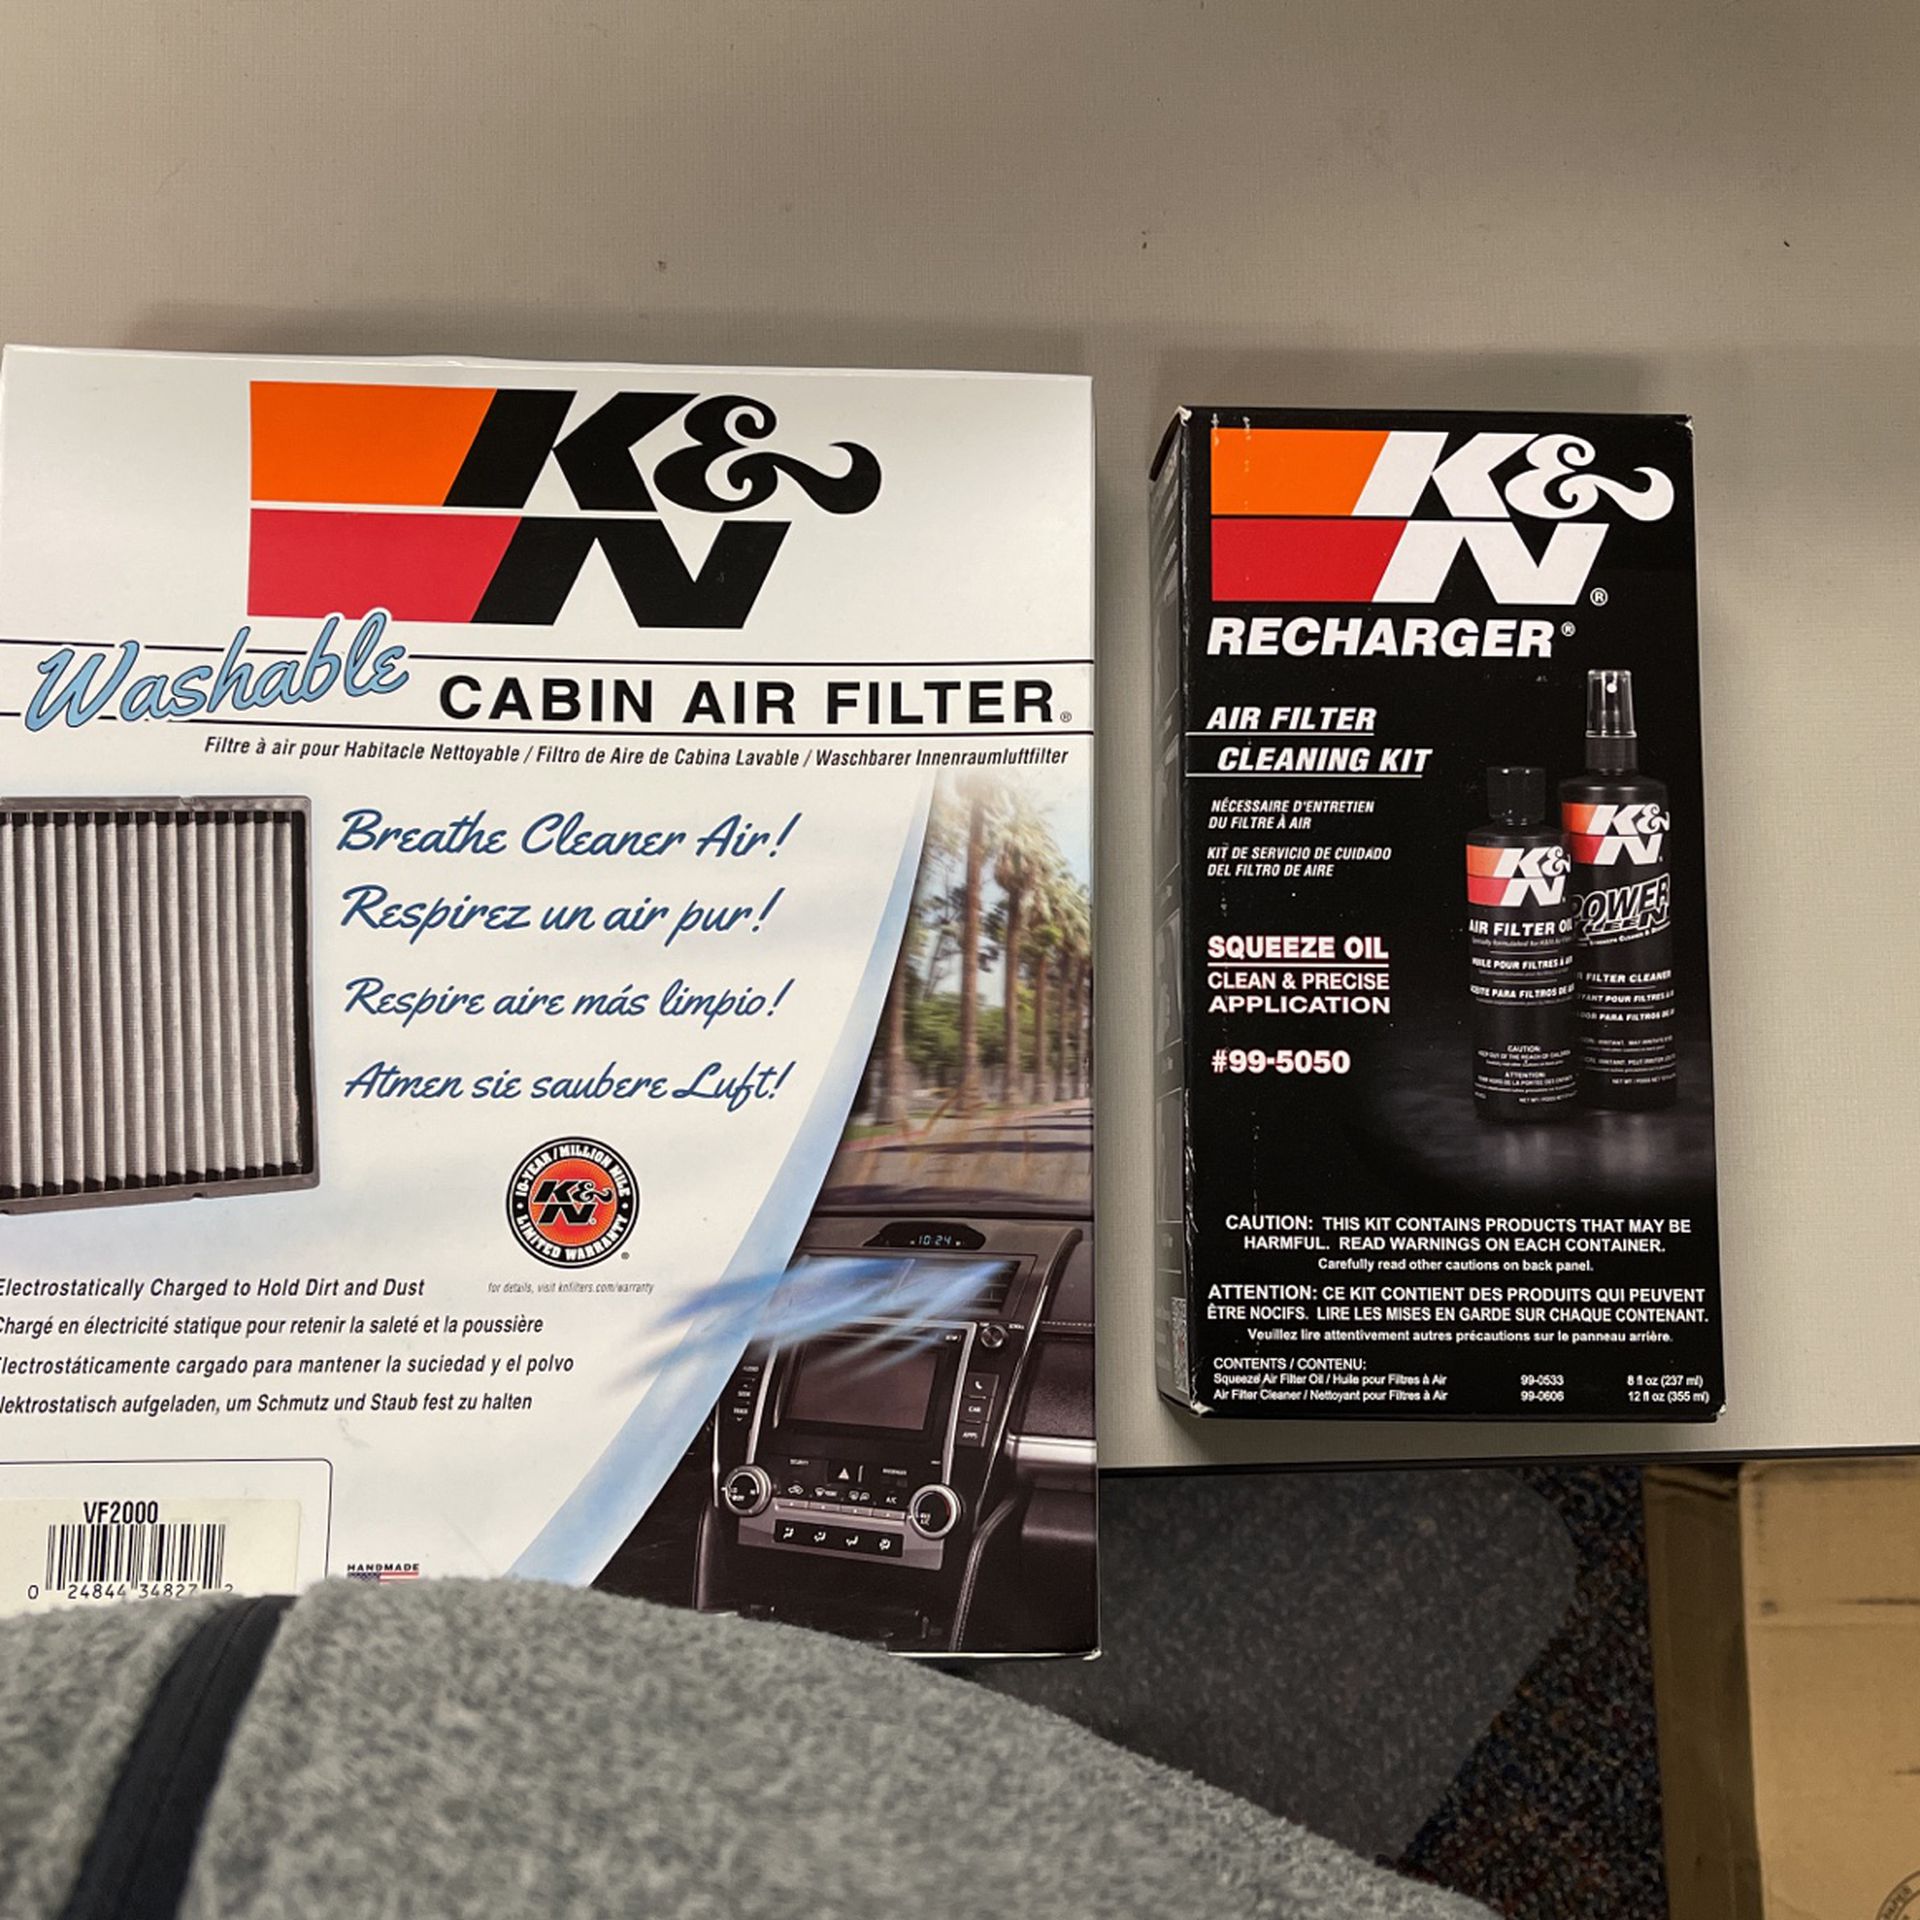 Washable Cabin Air Filter